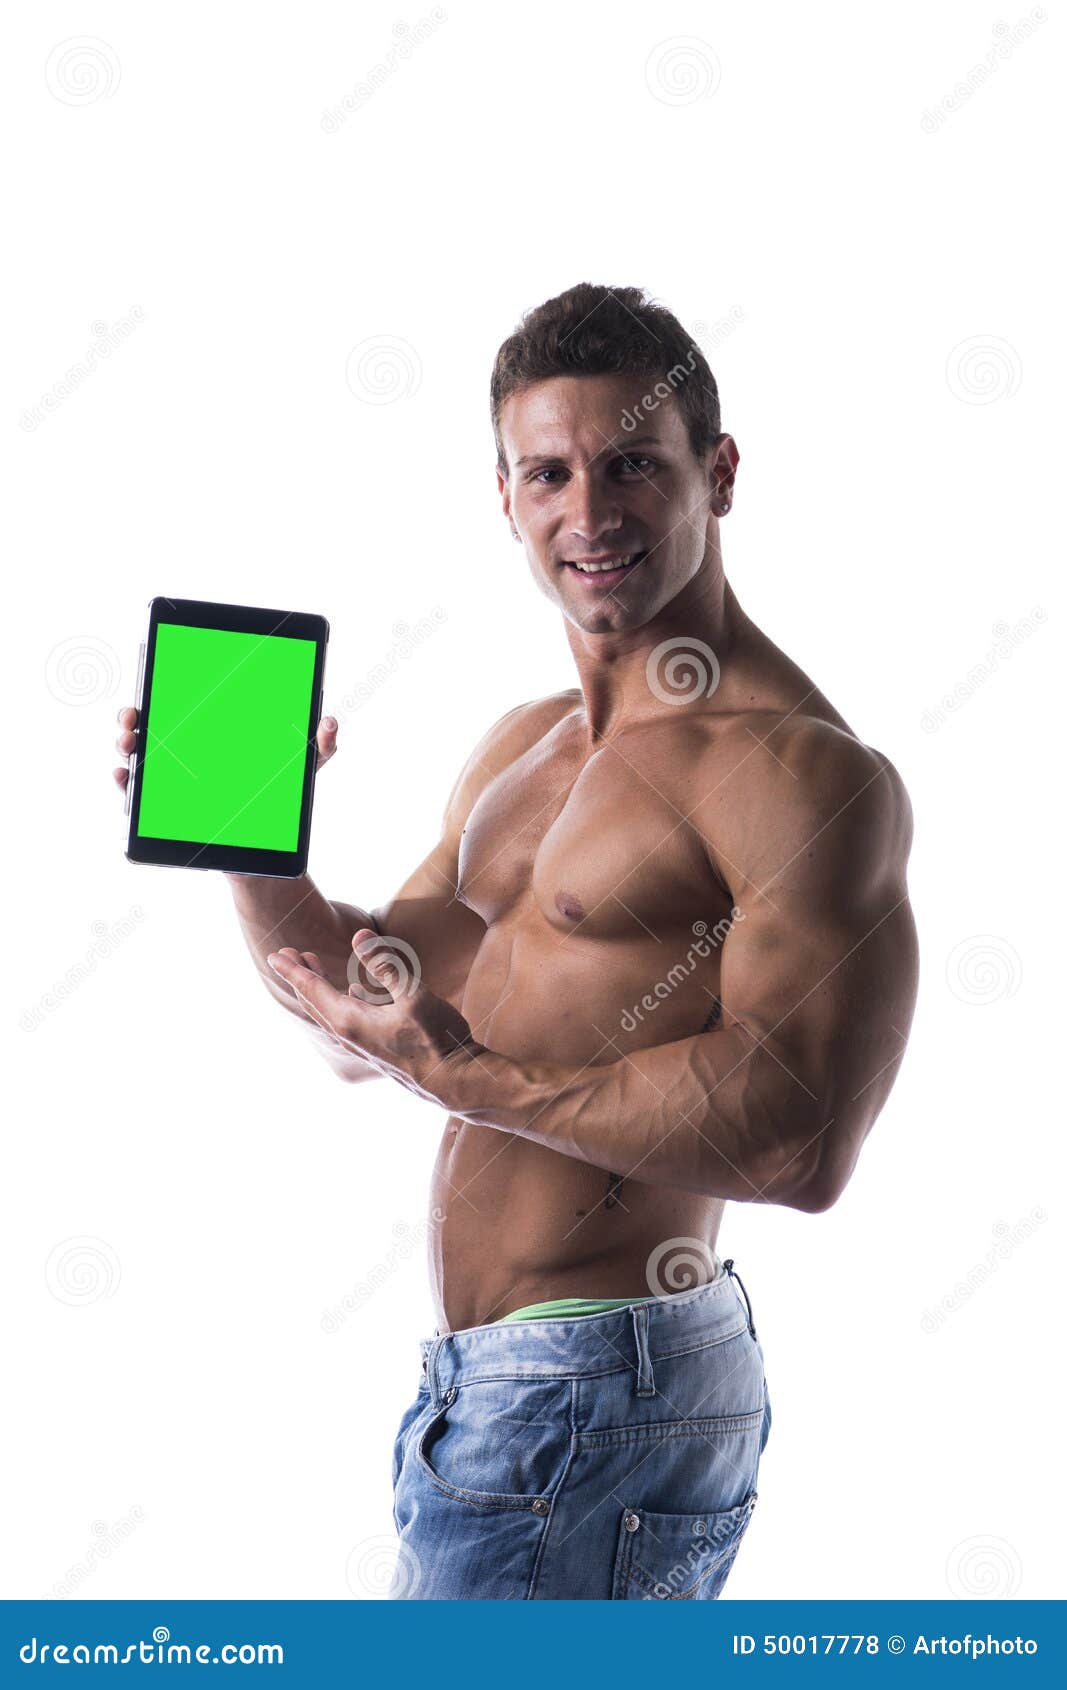 shirtless young male bodybuiler holding ebook reader or tablet pc